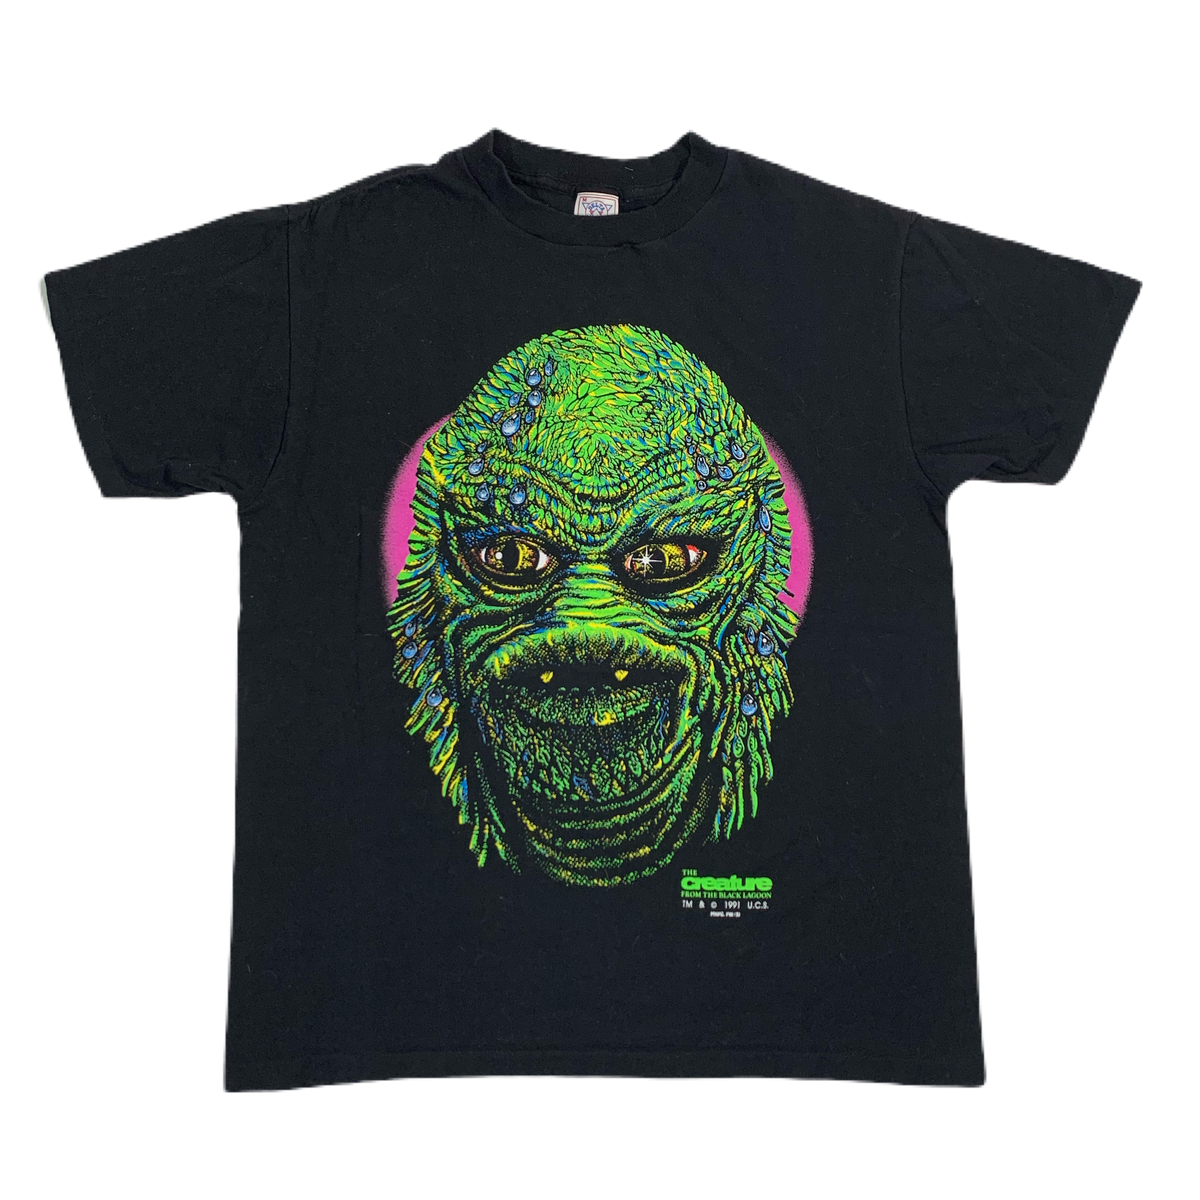 Vintage The Creature From The Black Lagoon “1991” T-Shirt - jointcustodydc